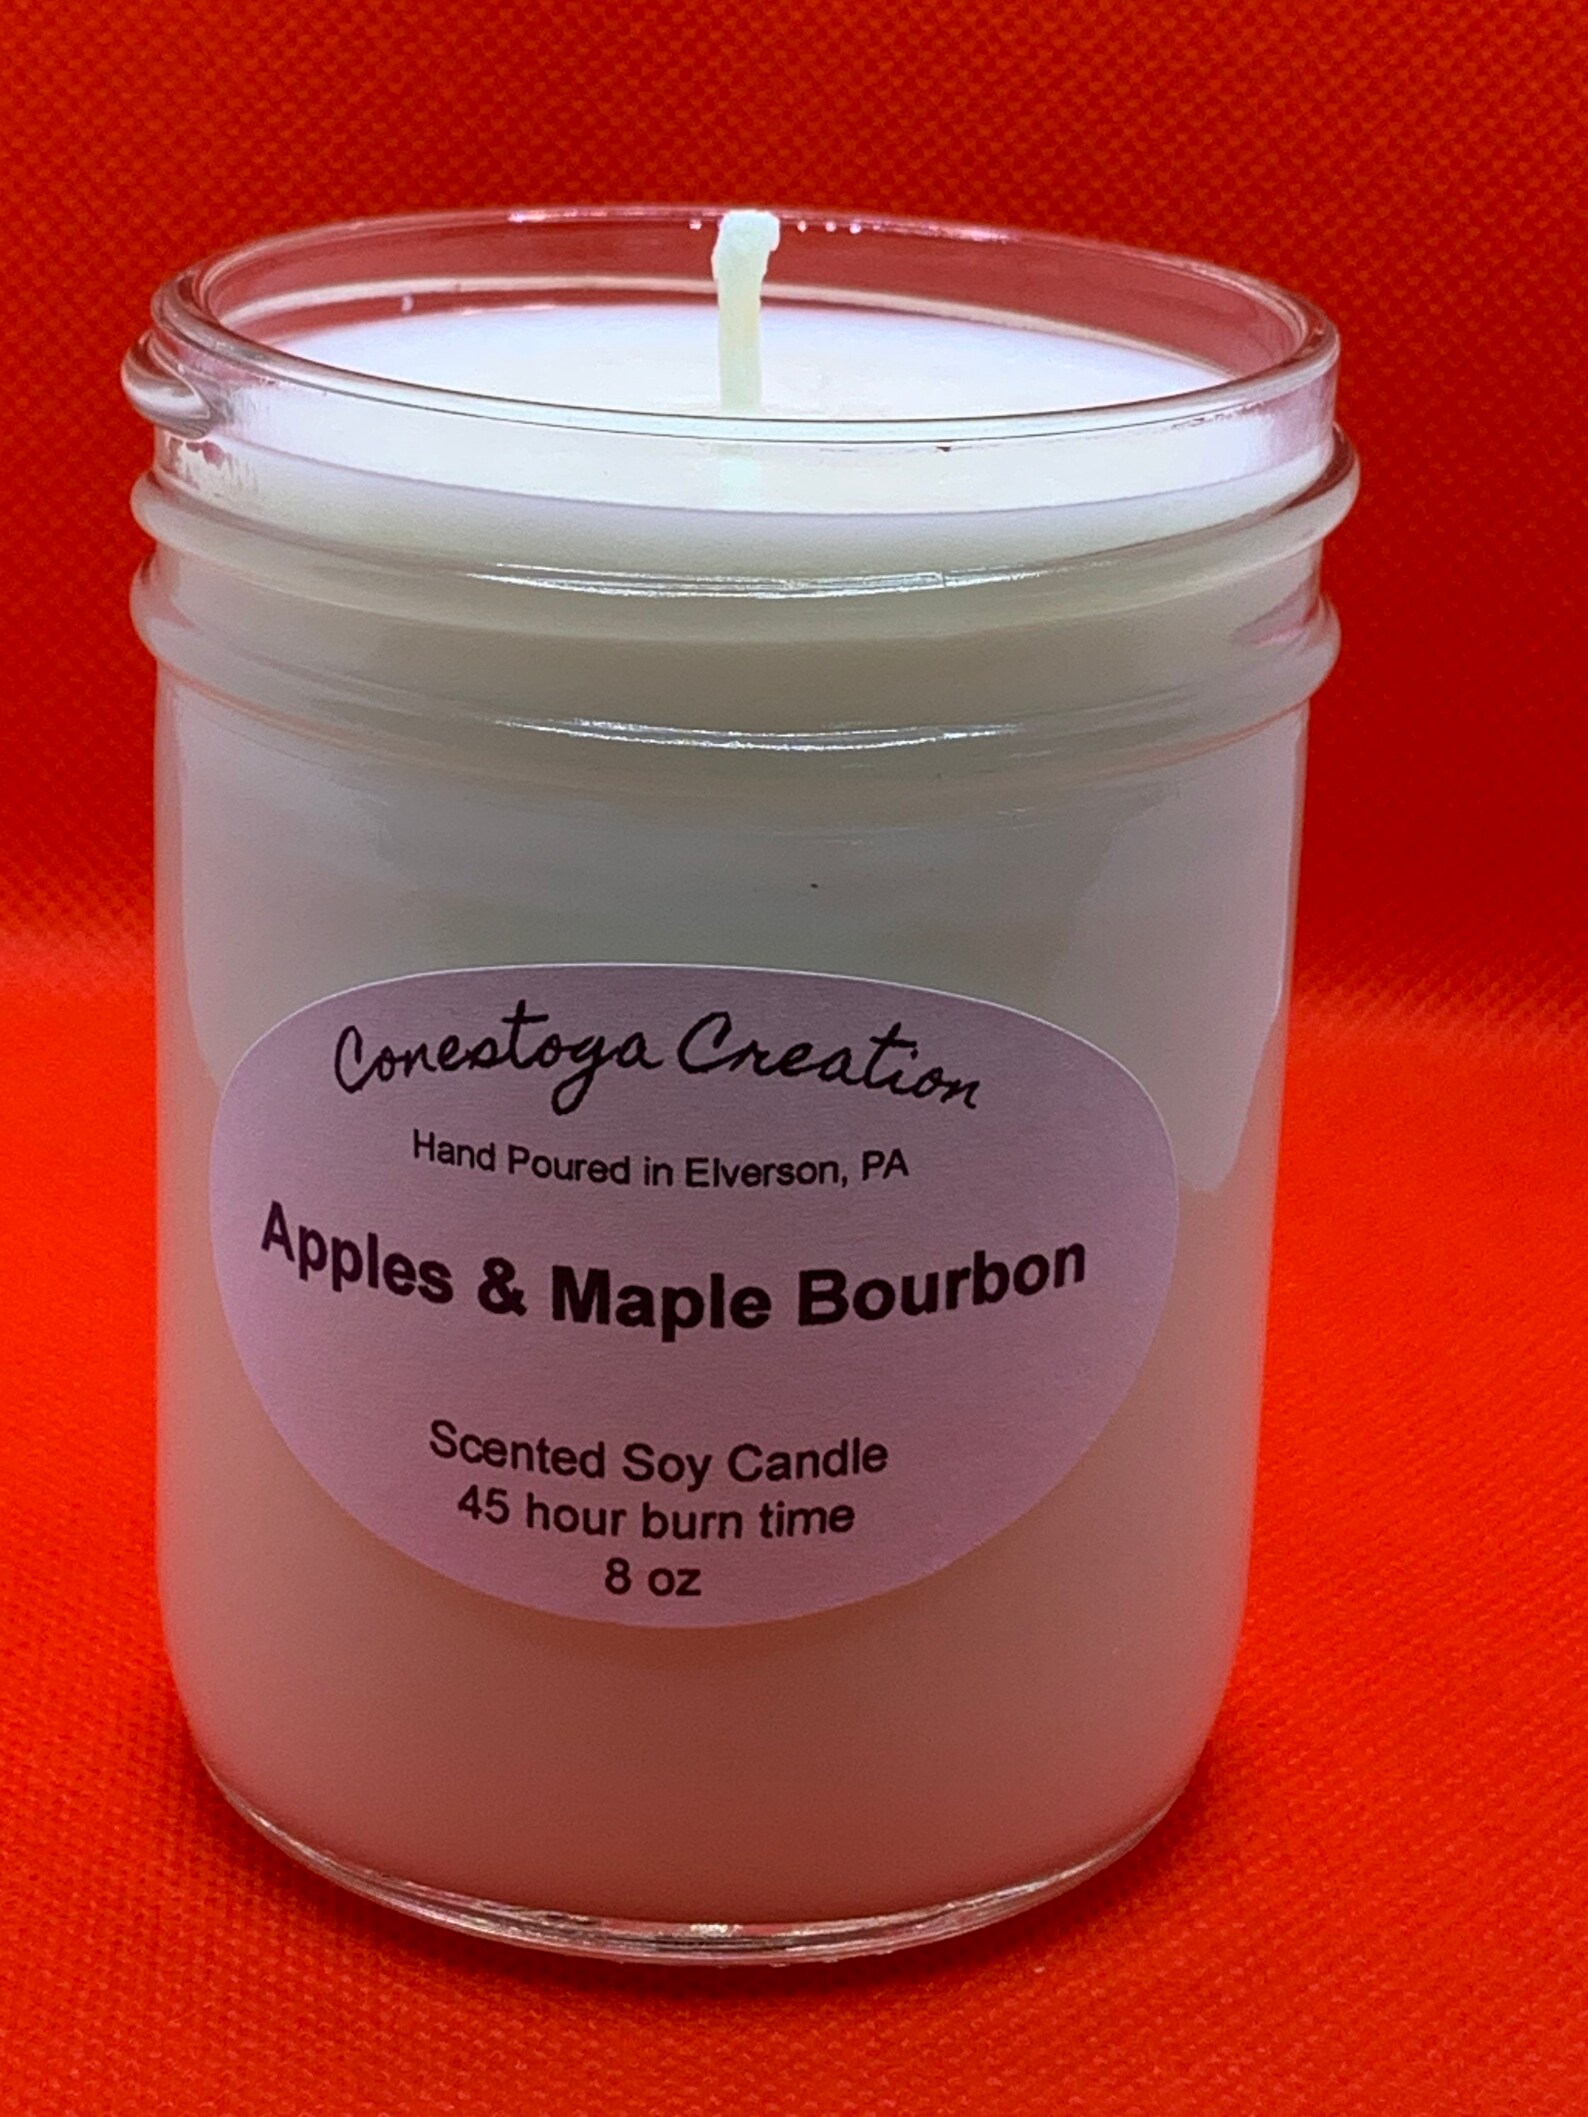 Apples and Maple Bourbon Scented Candle Fall Scents Fall | Etsy